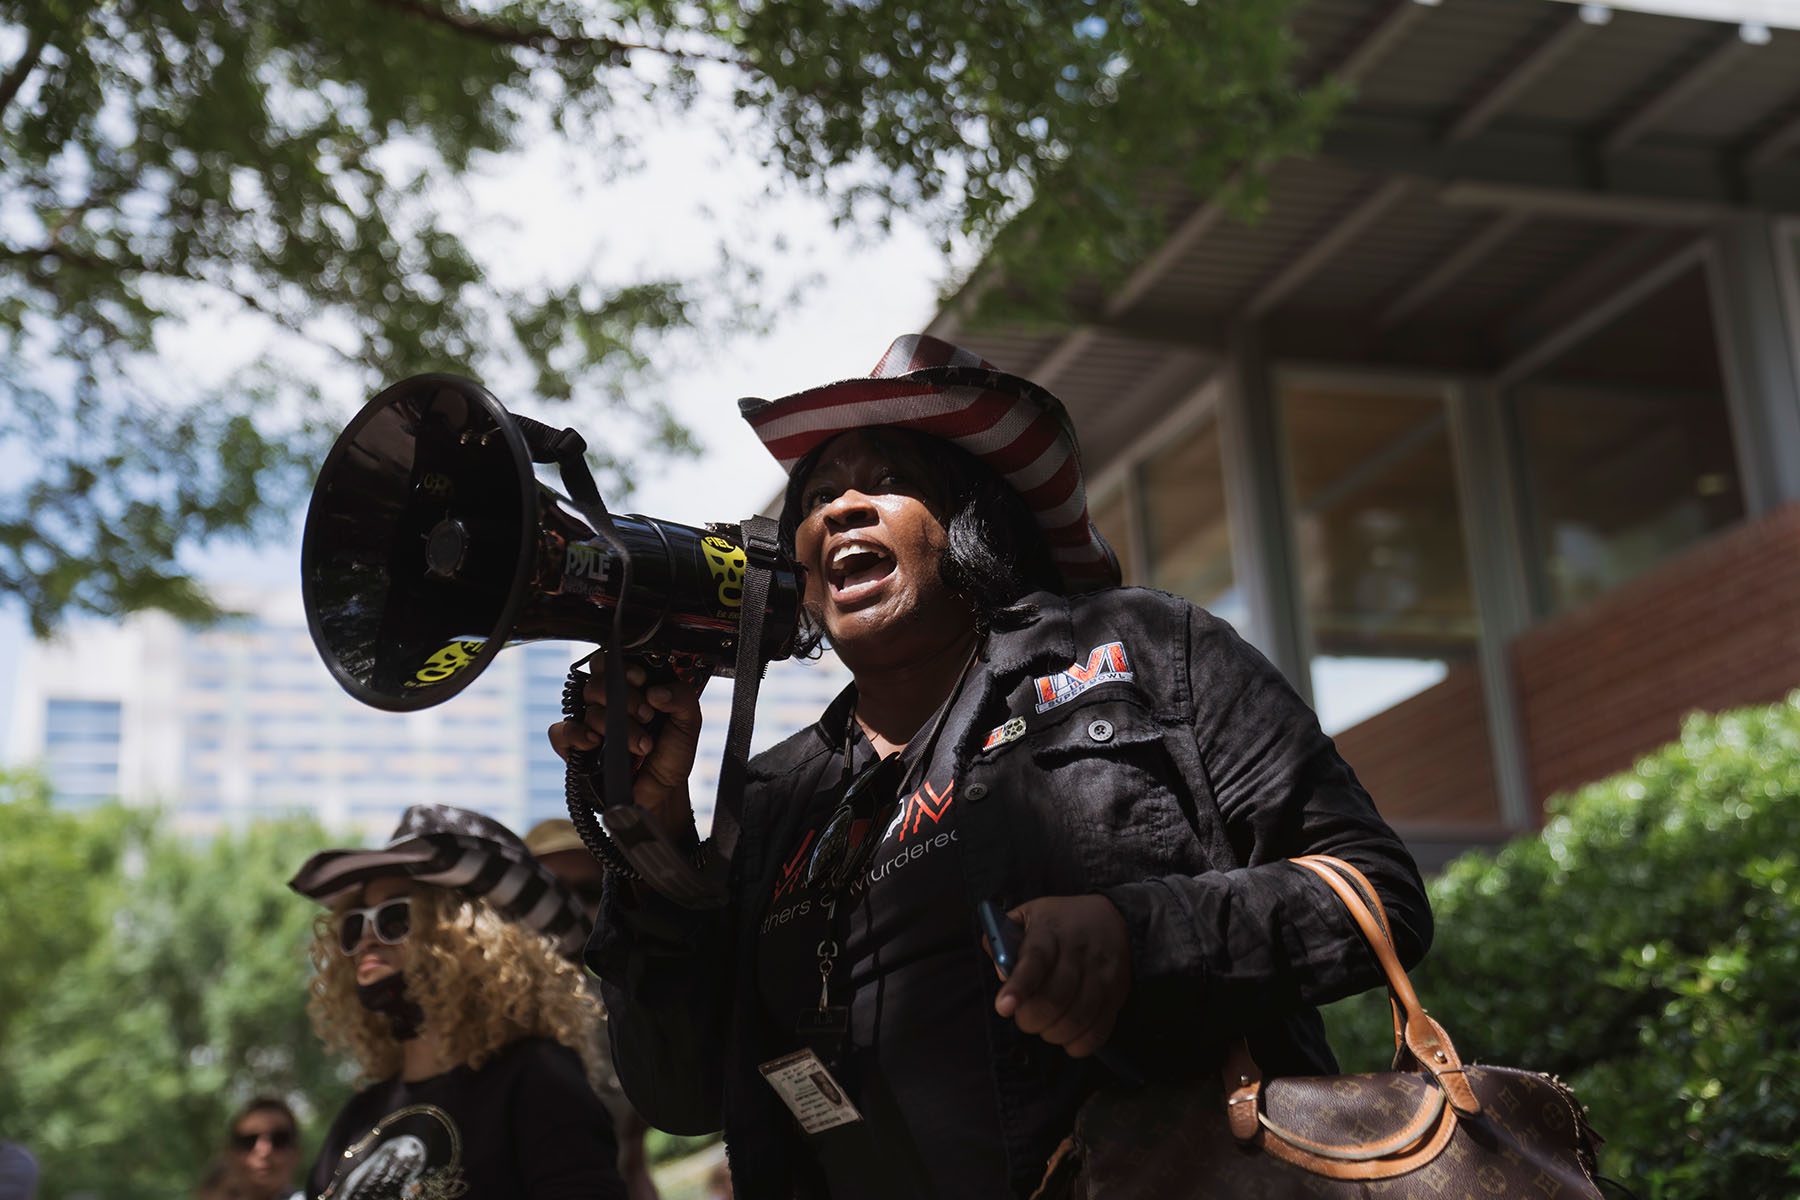 A woman yells through a megaphone during a protest.